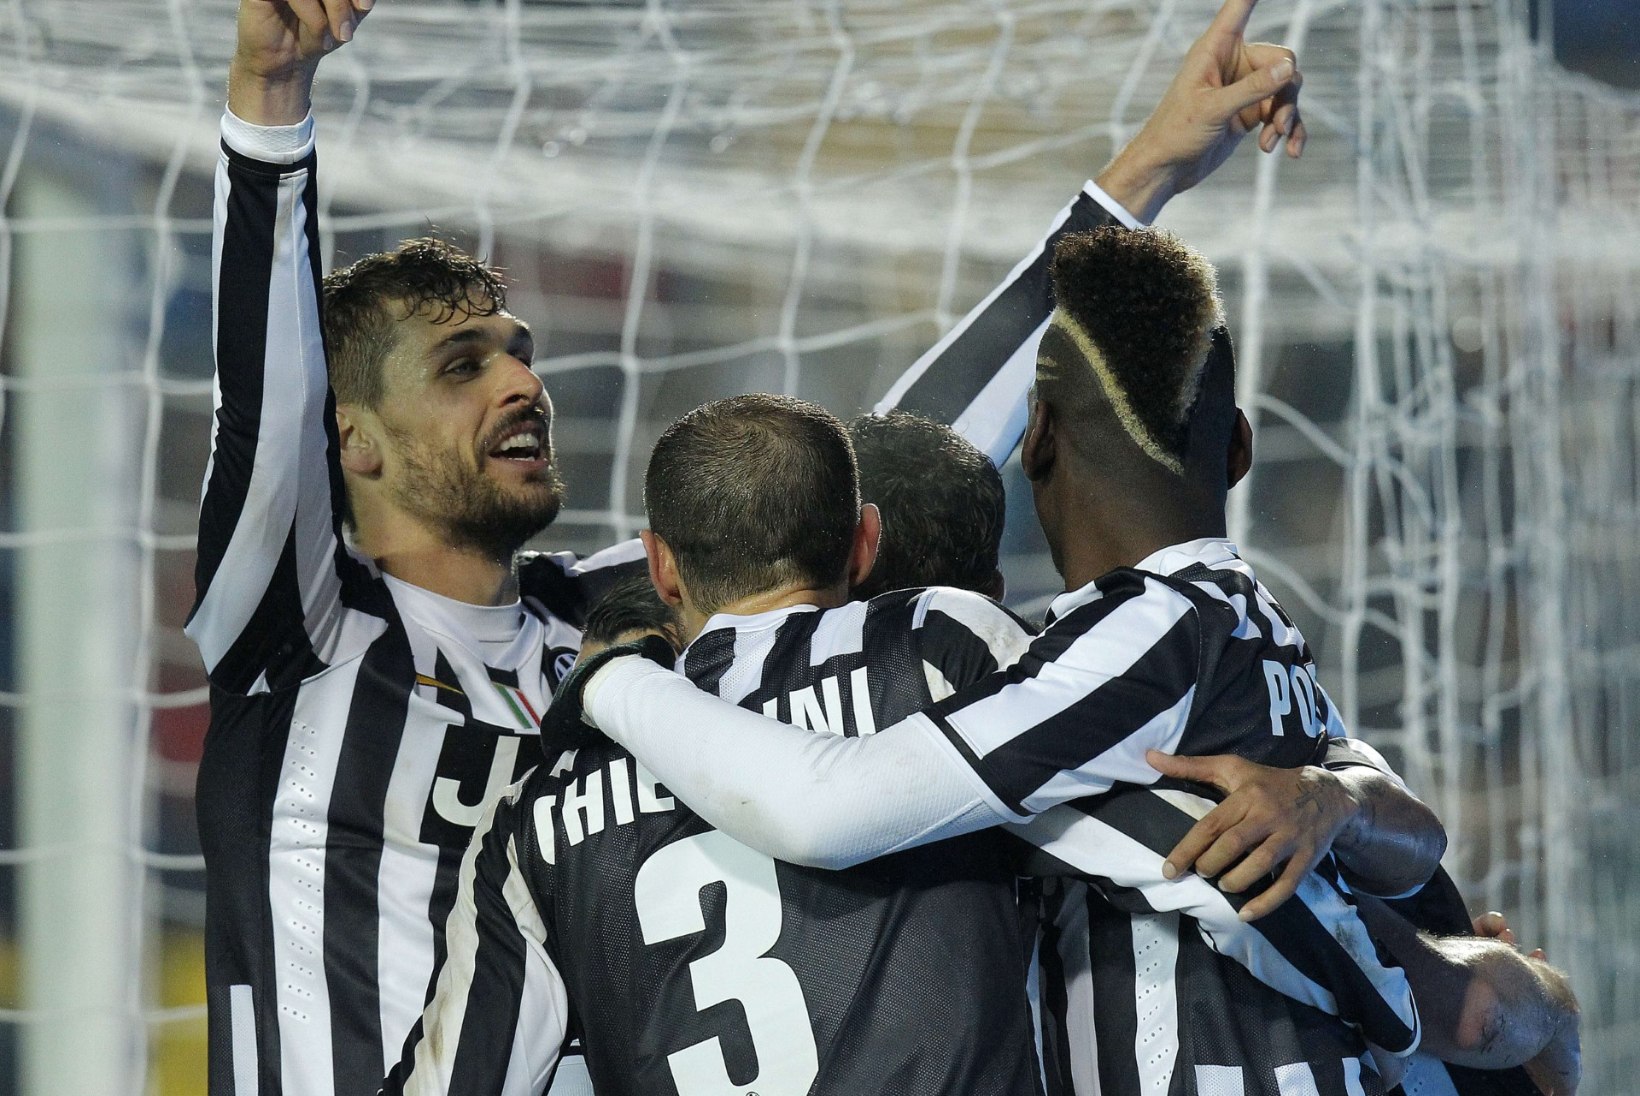 Serie A, matchday 18 preview: Juventus vs. AS Roma, the mother of all games